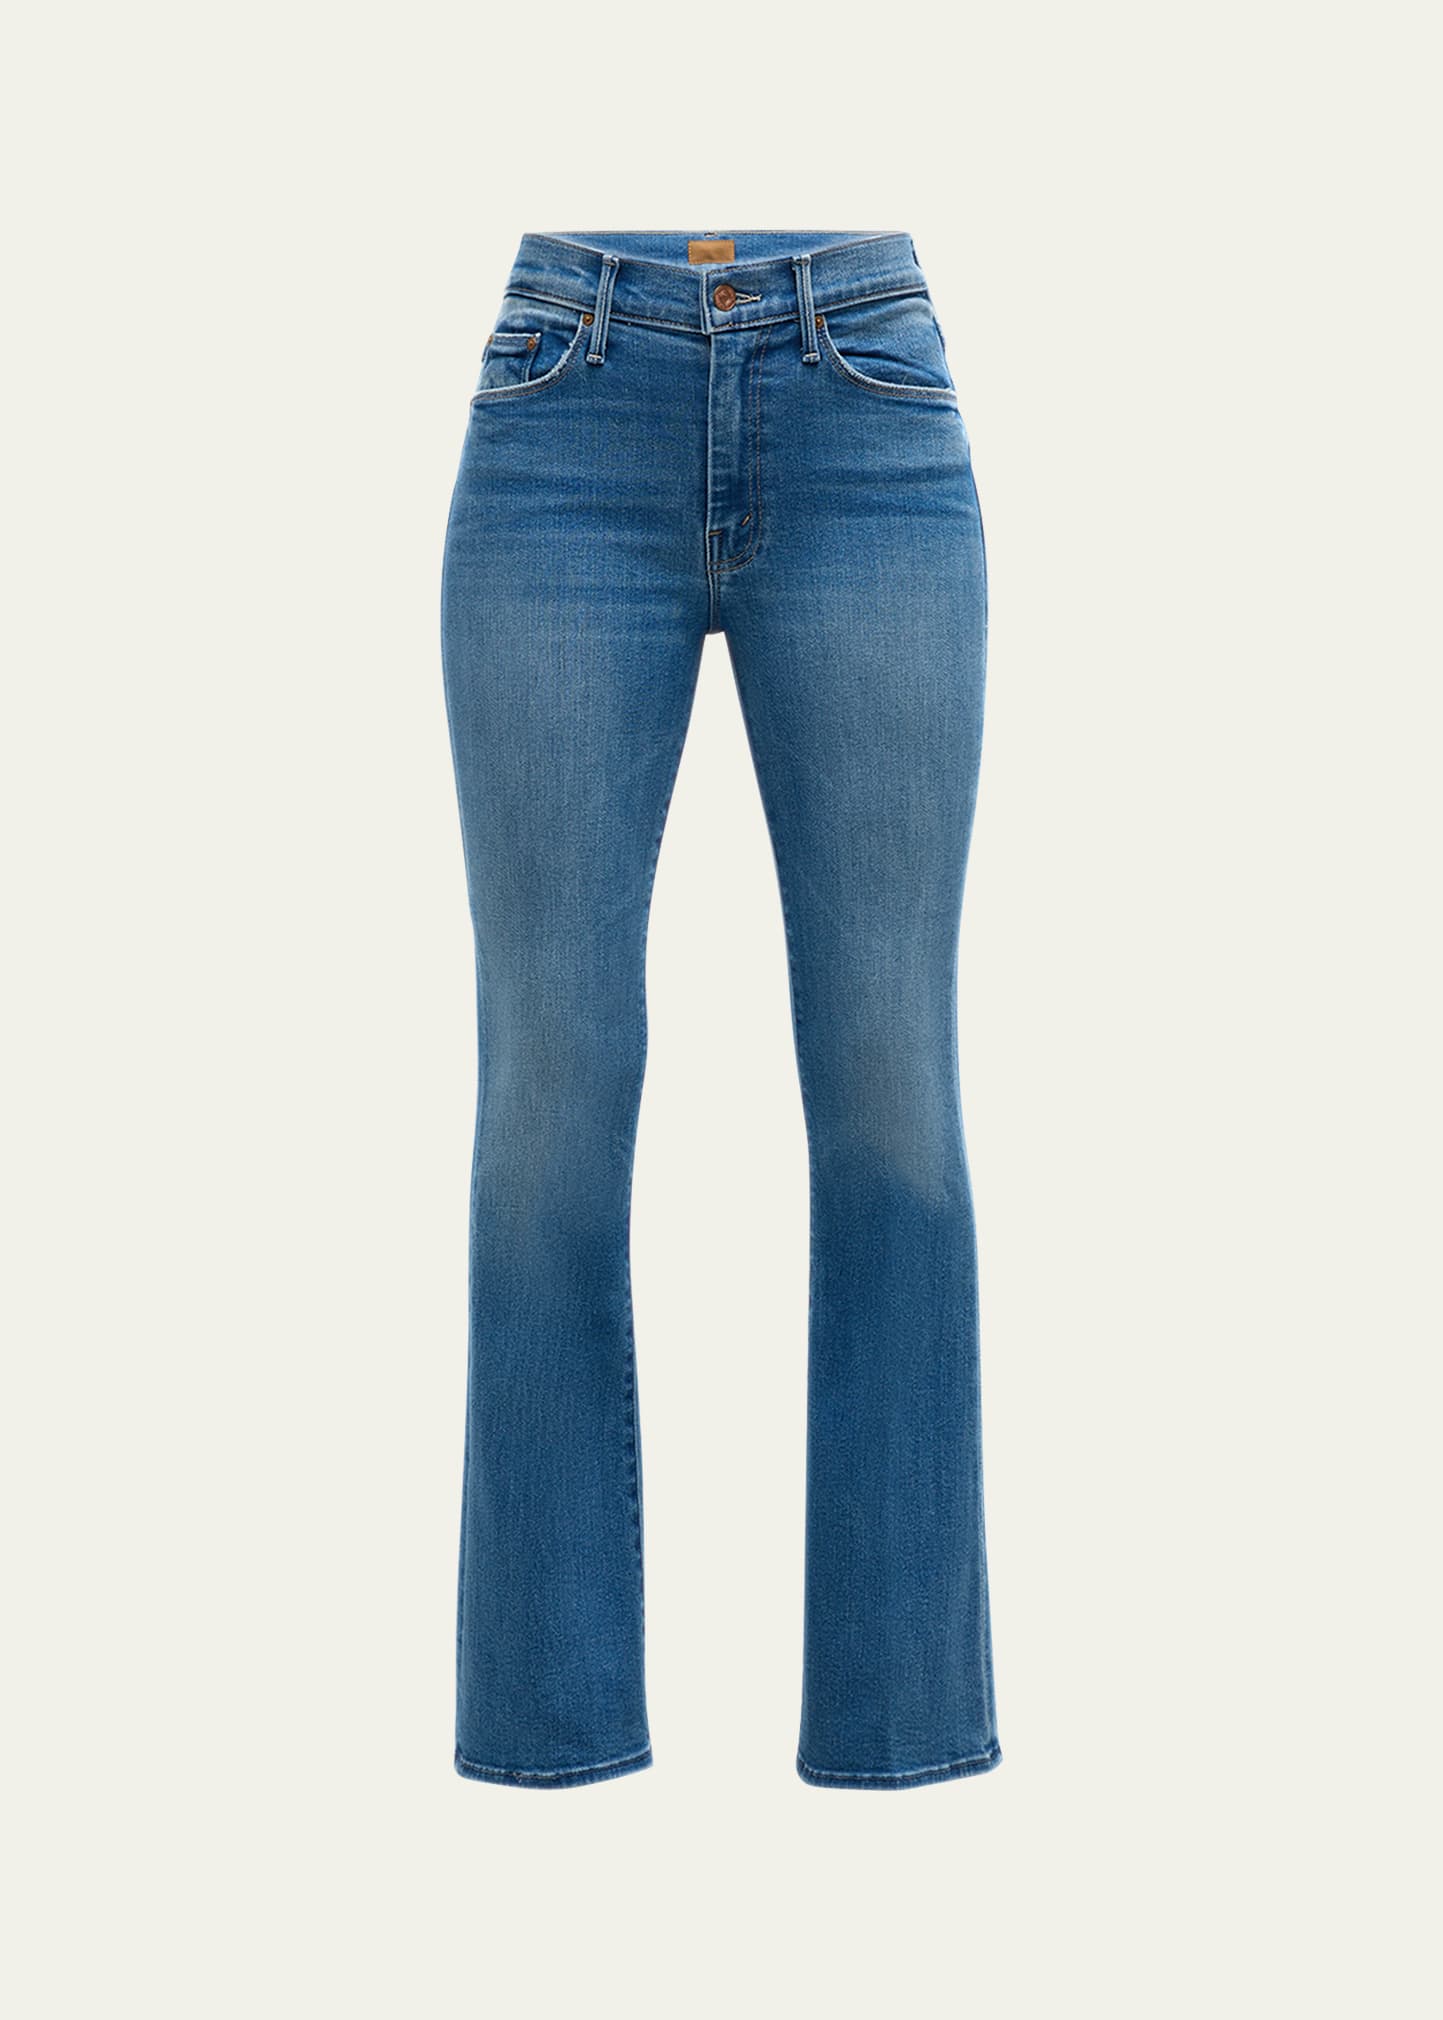 The Tomcat Ankle Jeans